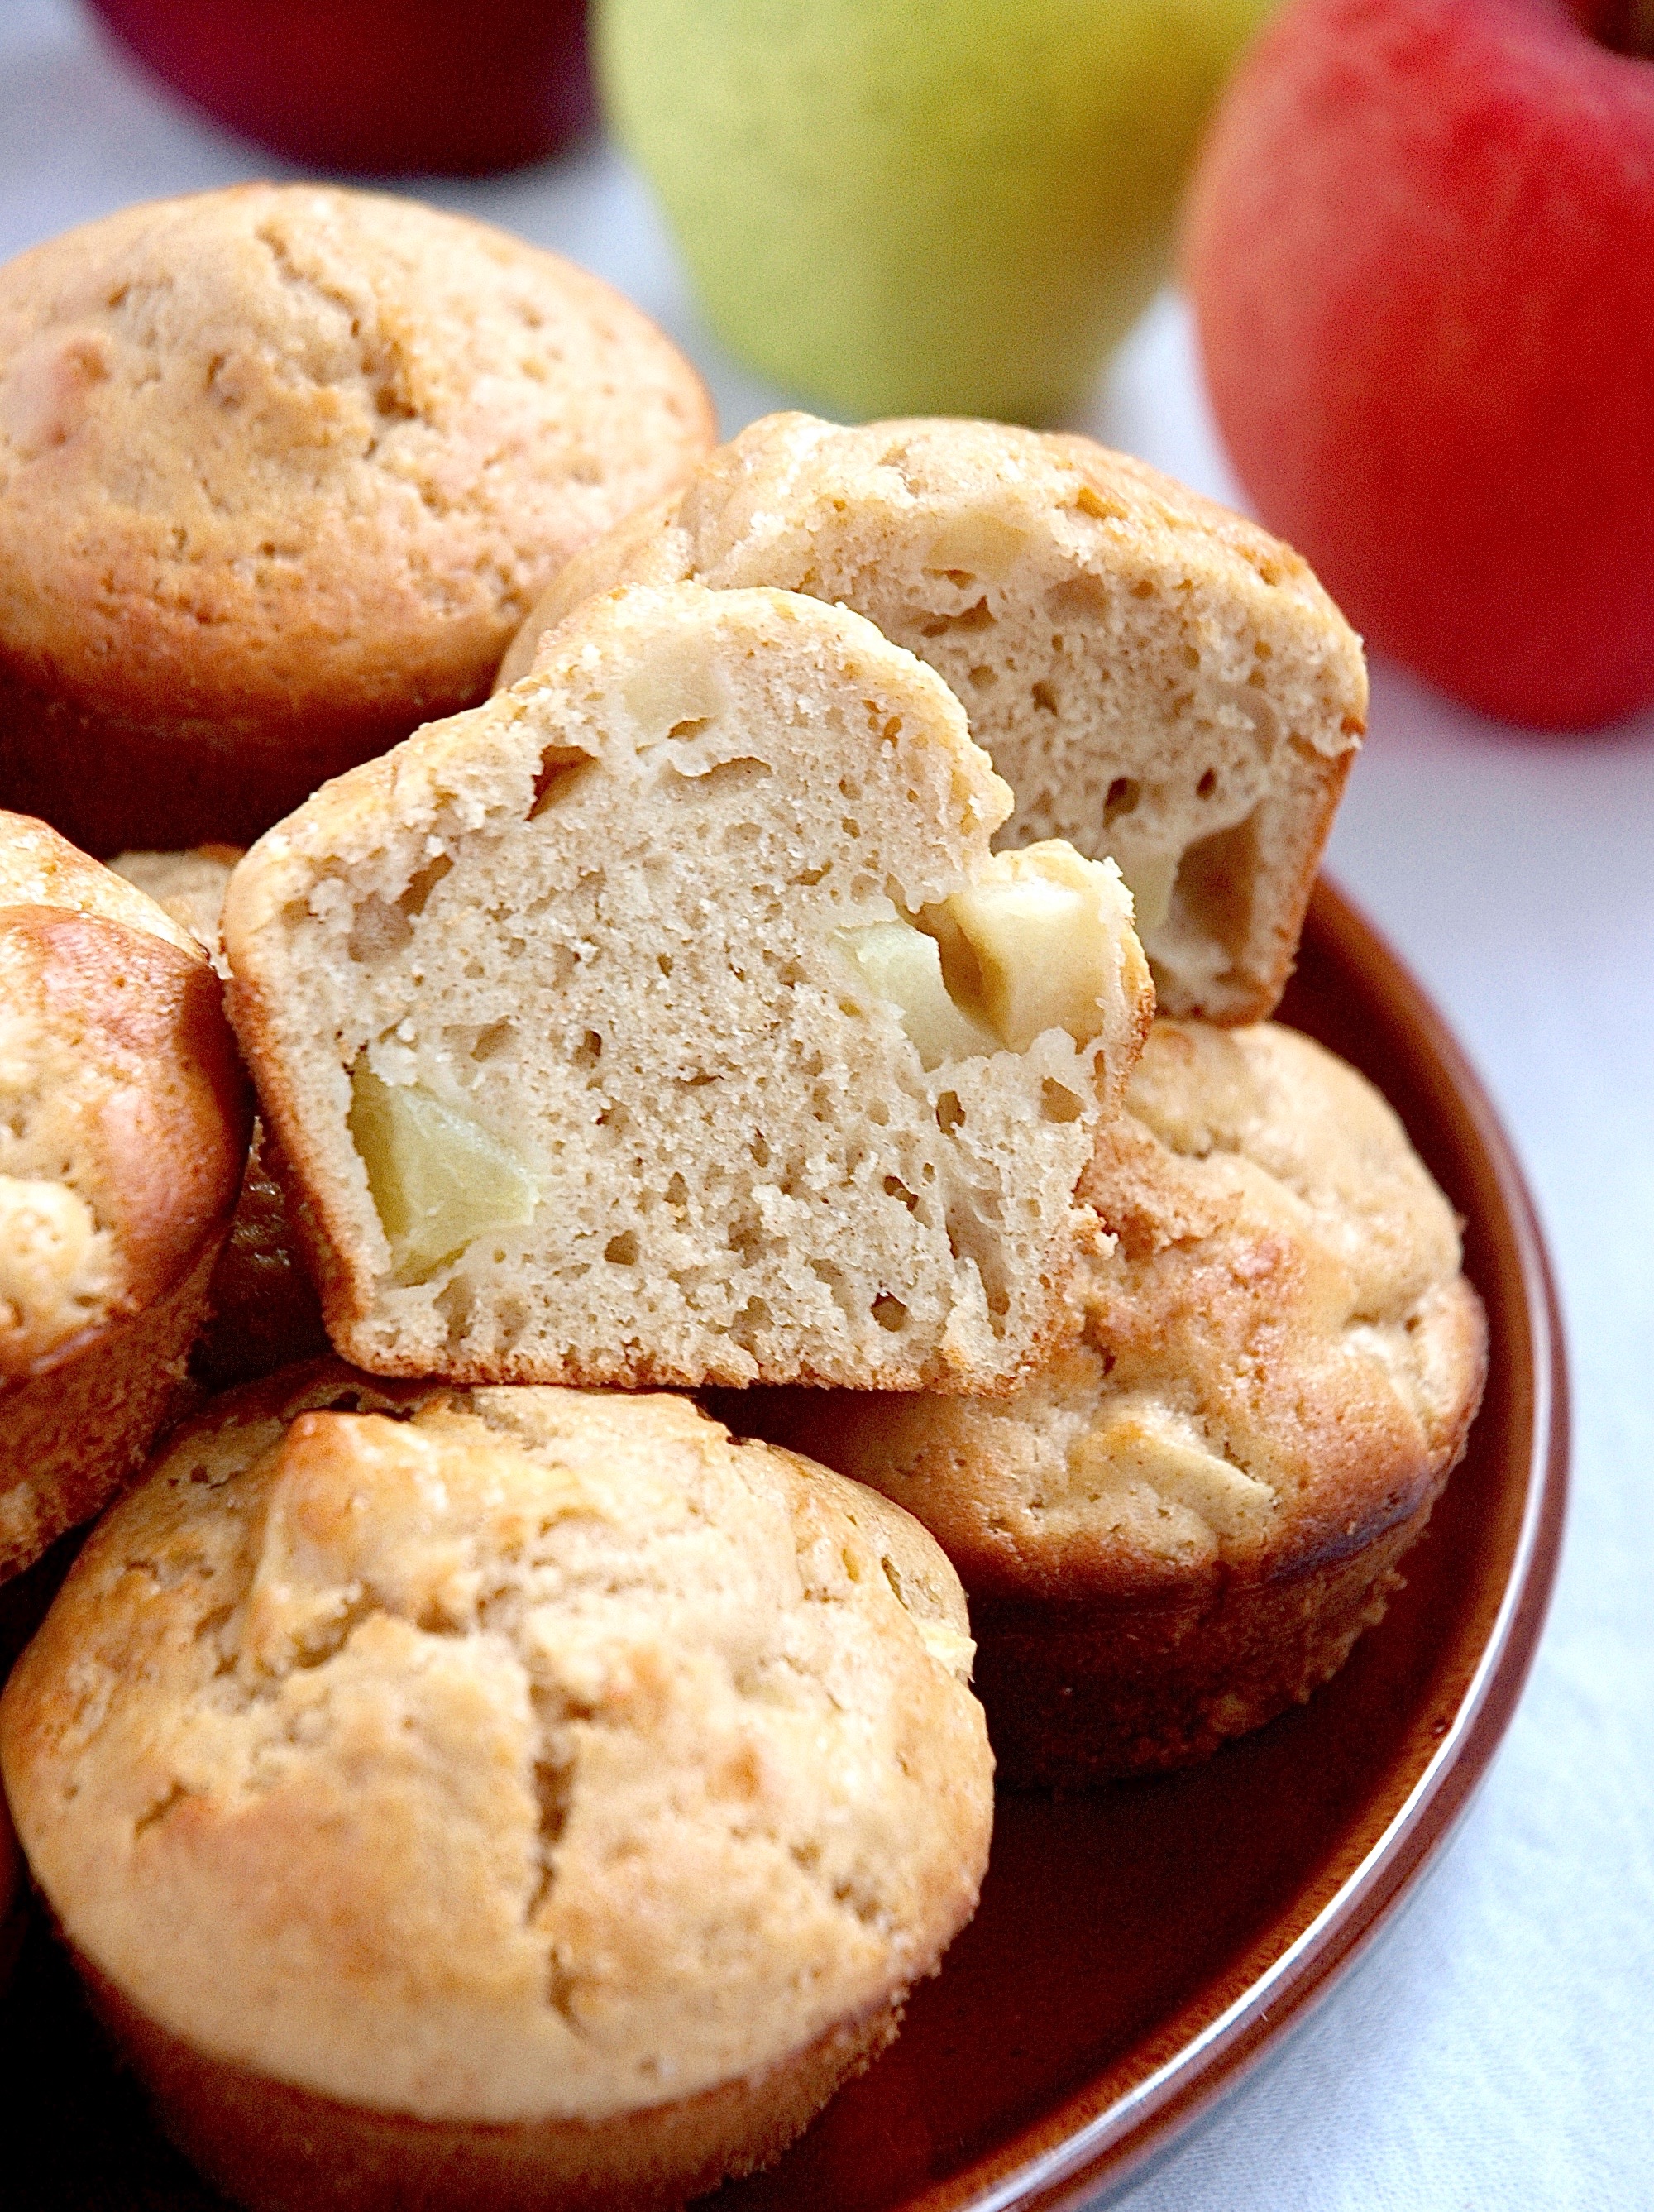 Ginger-Spiced Apple Muffins